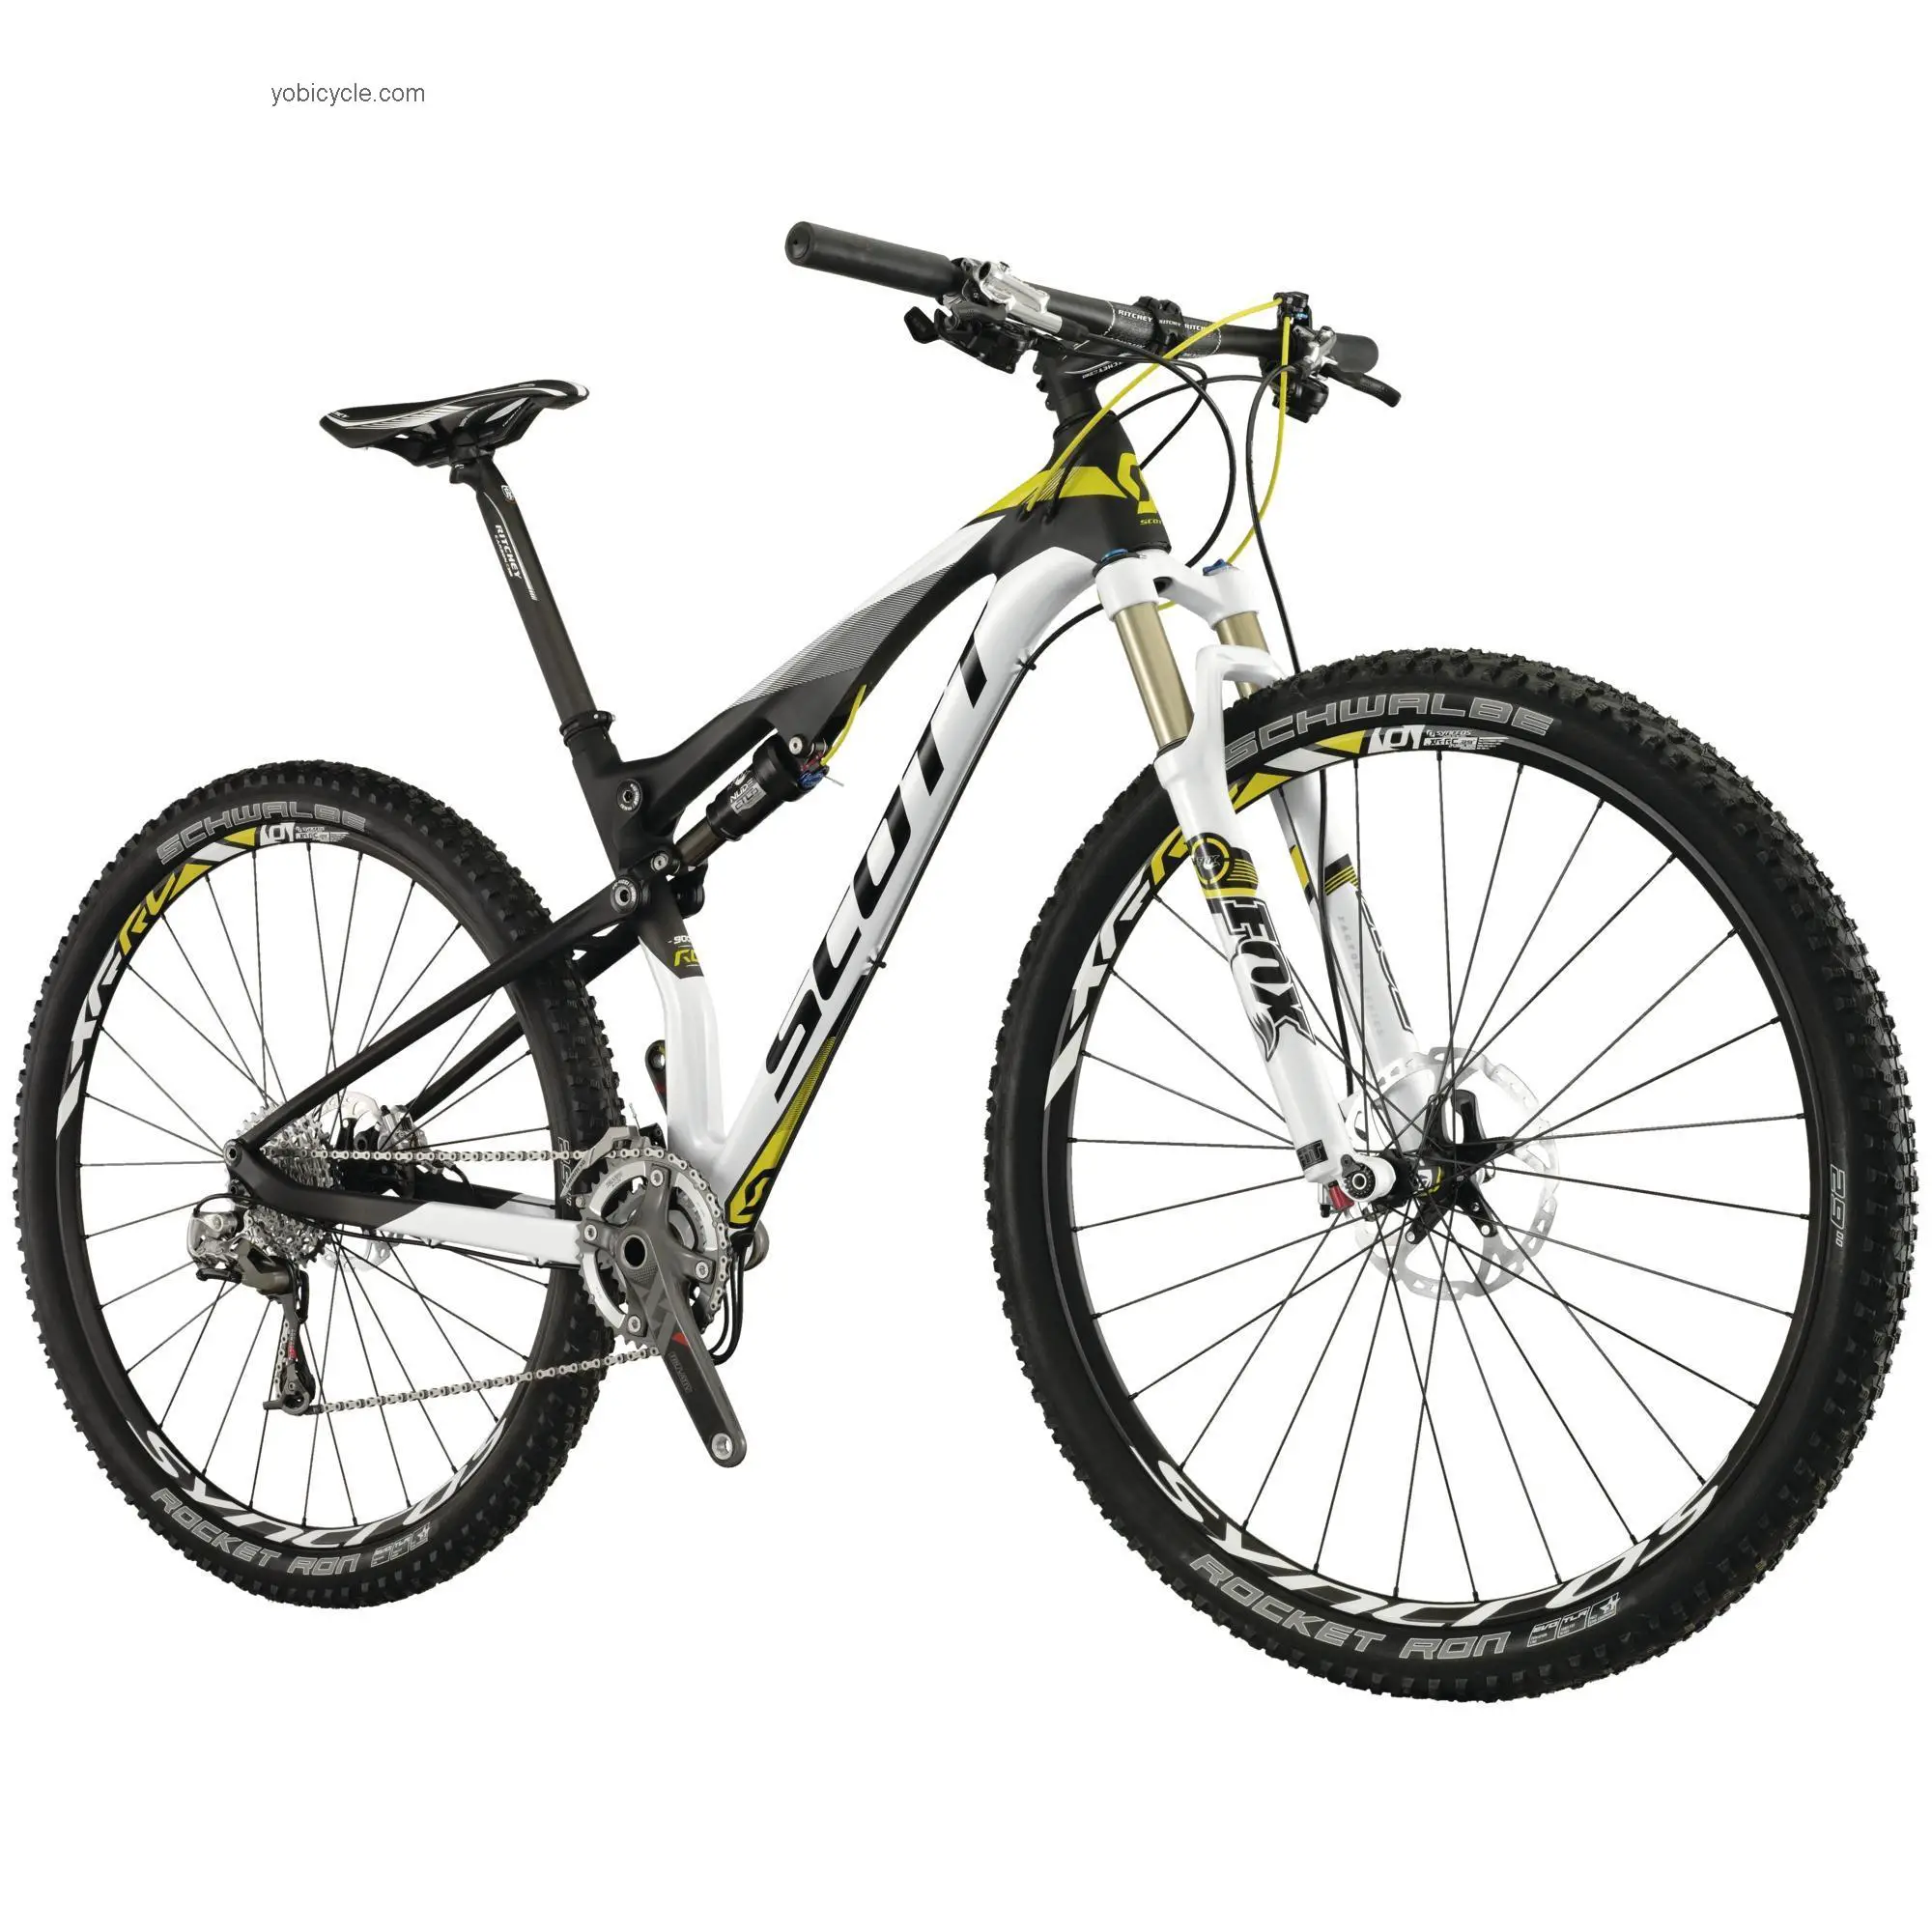 Scott Spark 900 RC competitors and comparison tool online specs and performance